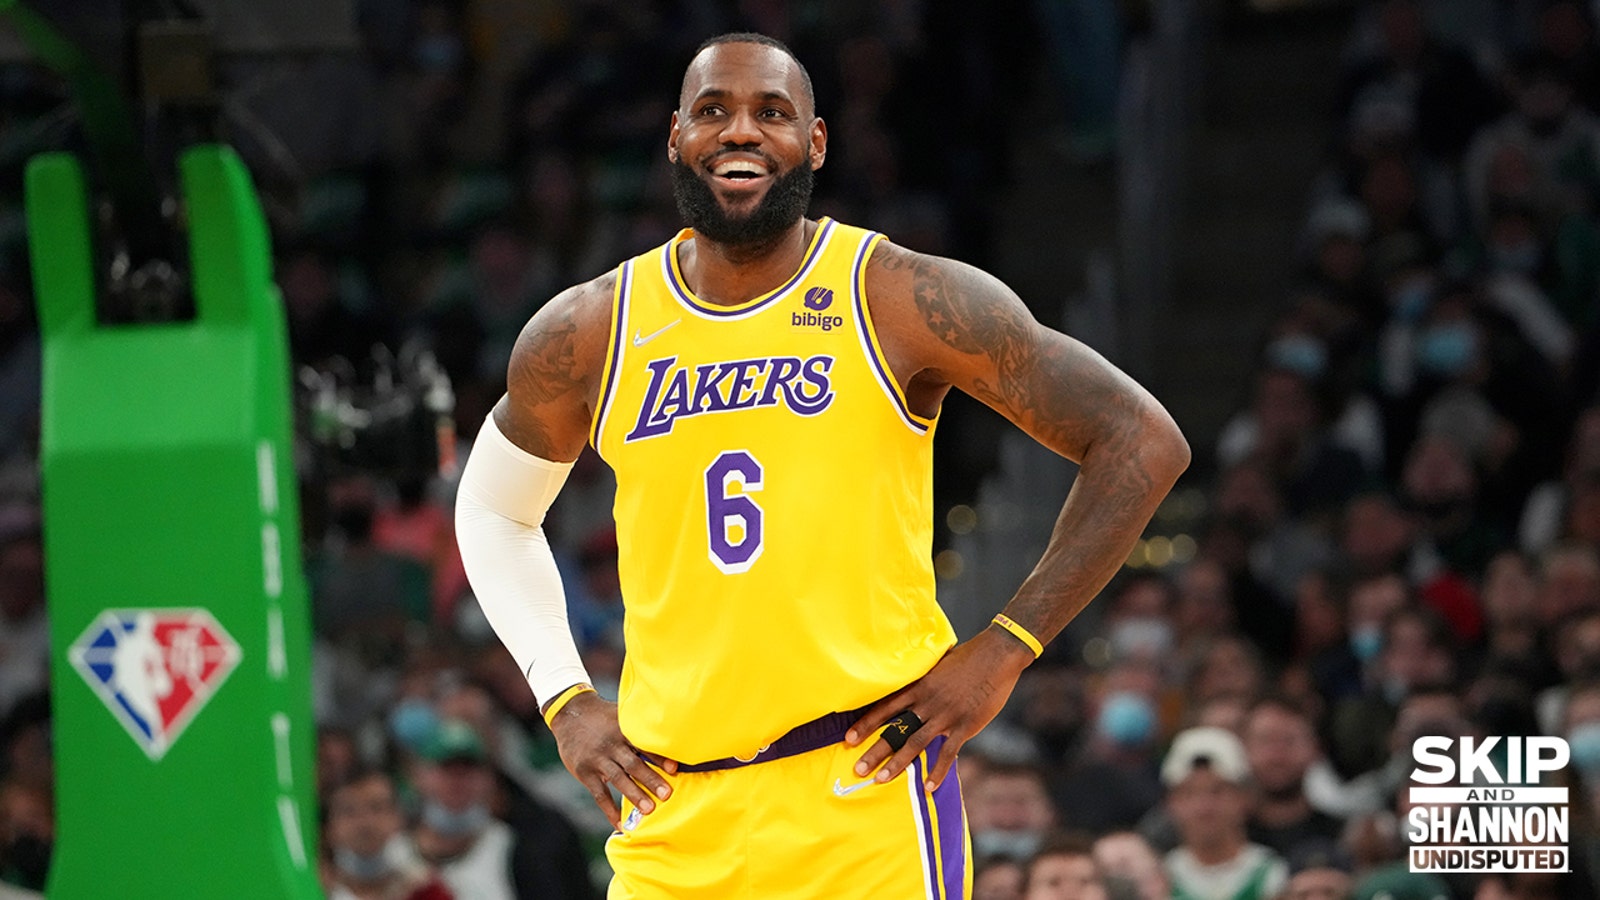 LeBron James 'in awe' of potentially becoming NBA's all-time leading scorer 